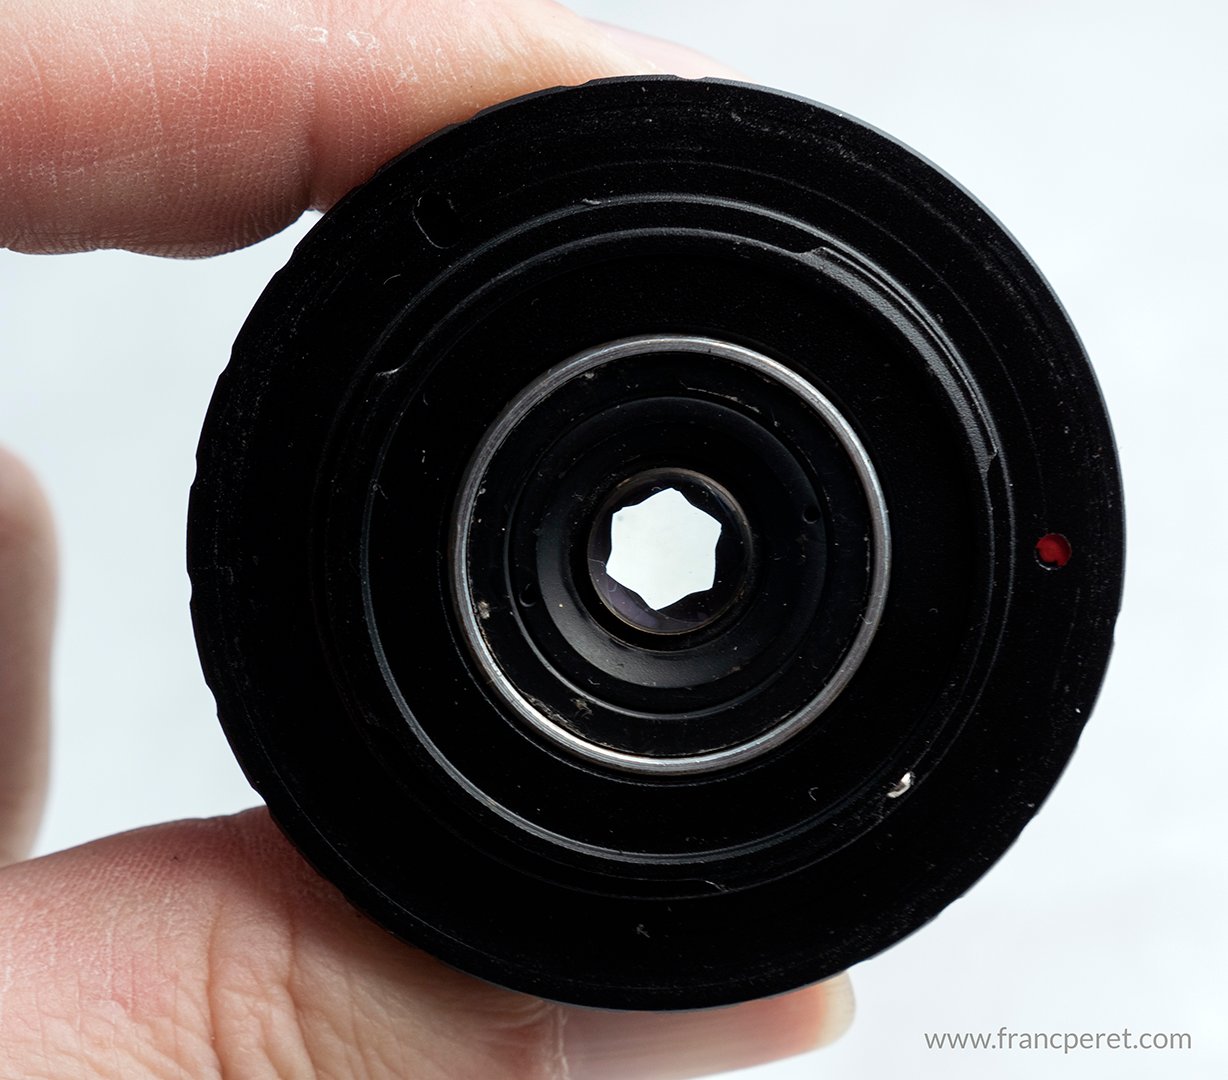 Different characteristic than the other Cine Nikkor for the 13mm with 6 blades for an aperture which looks like a star.